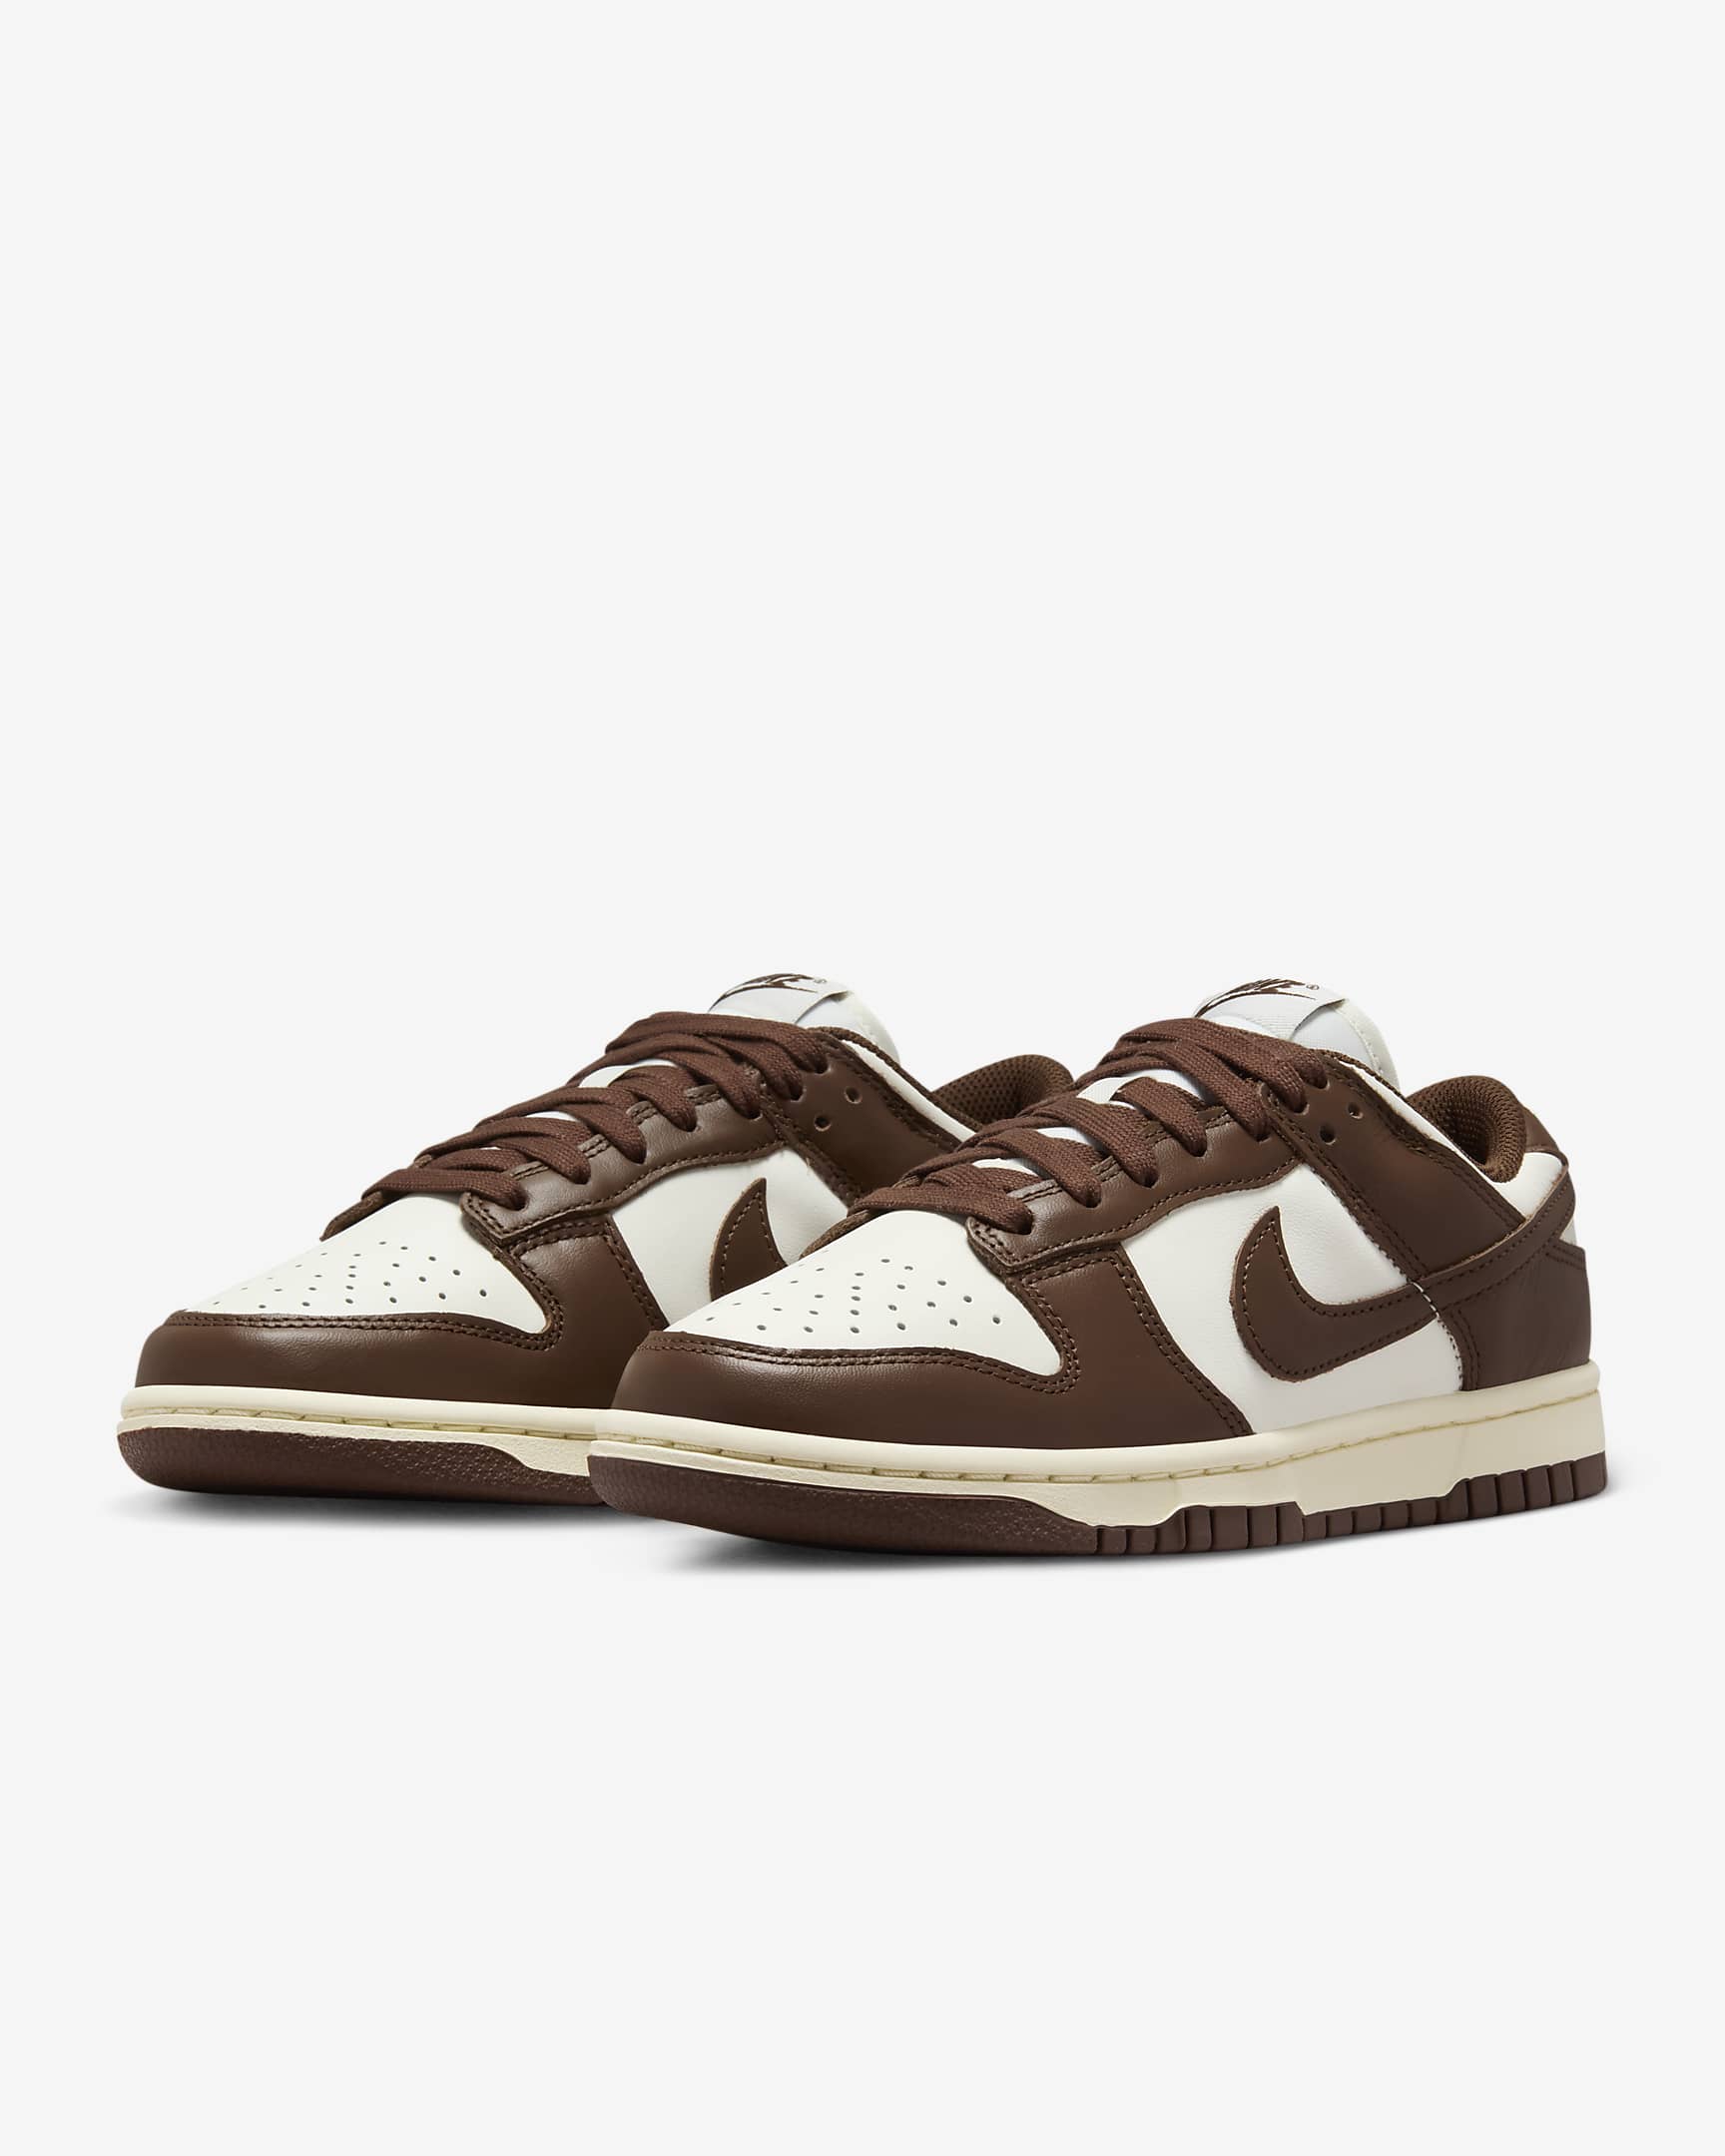 Nike Dunk Low Women's Shoes - Sail/Coconut Milk/Cacao Wow